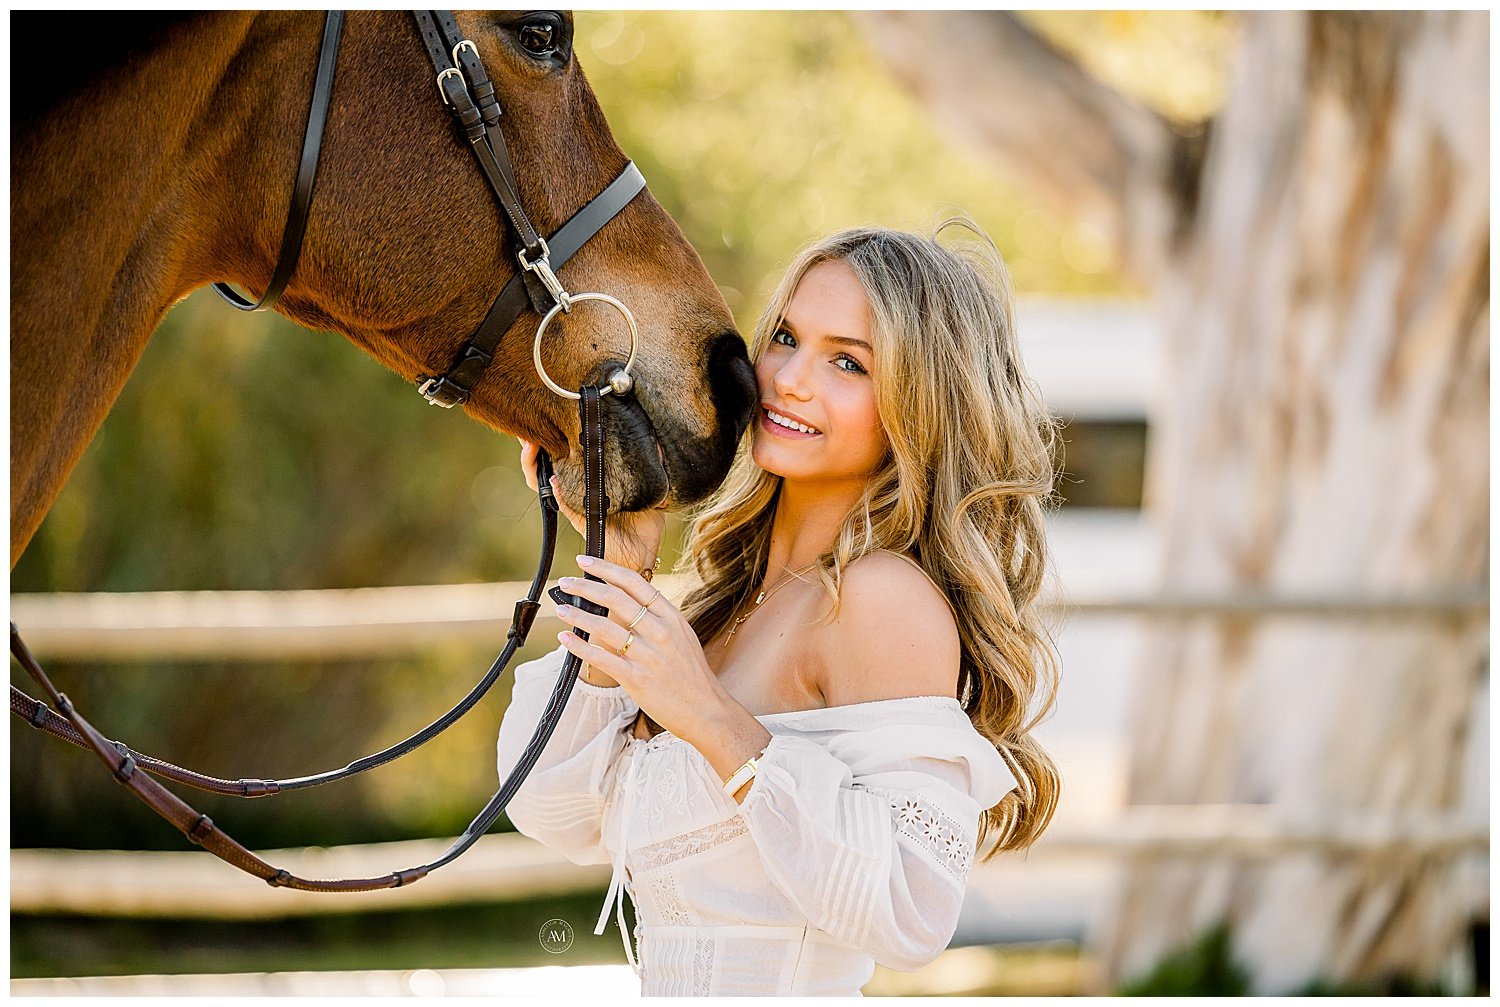 Camryn and horses